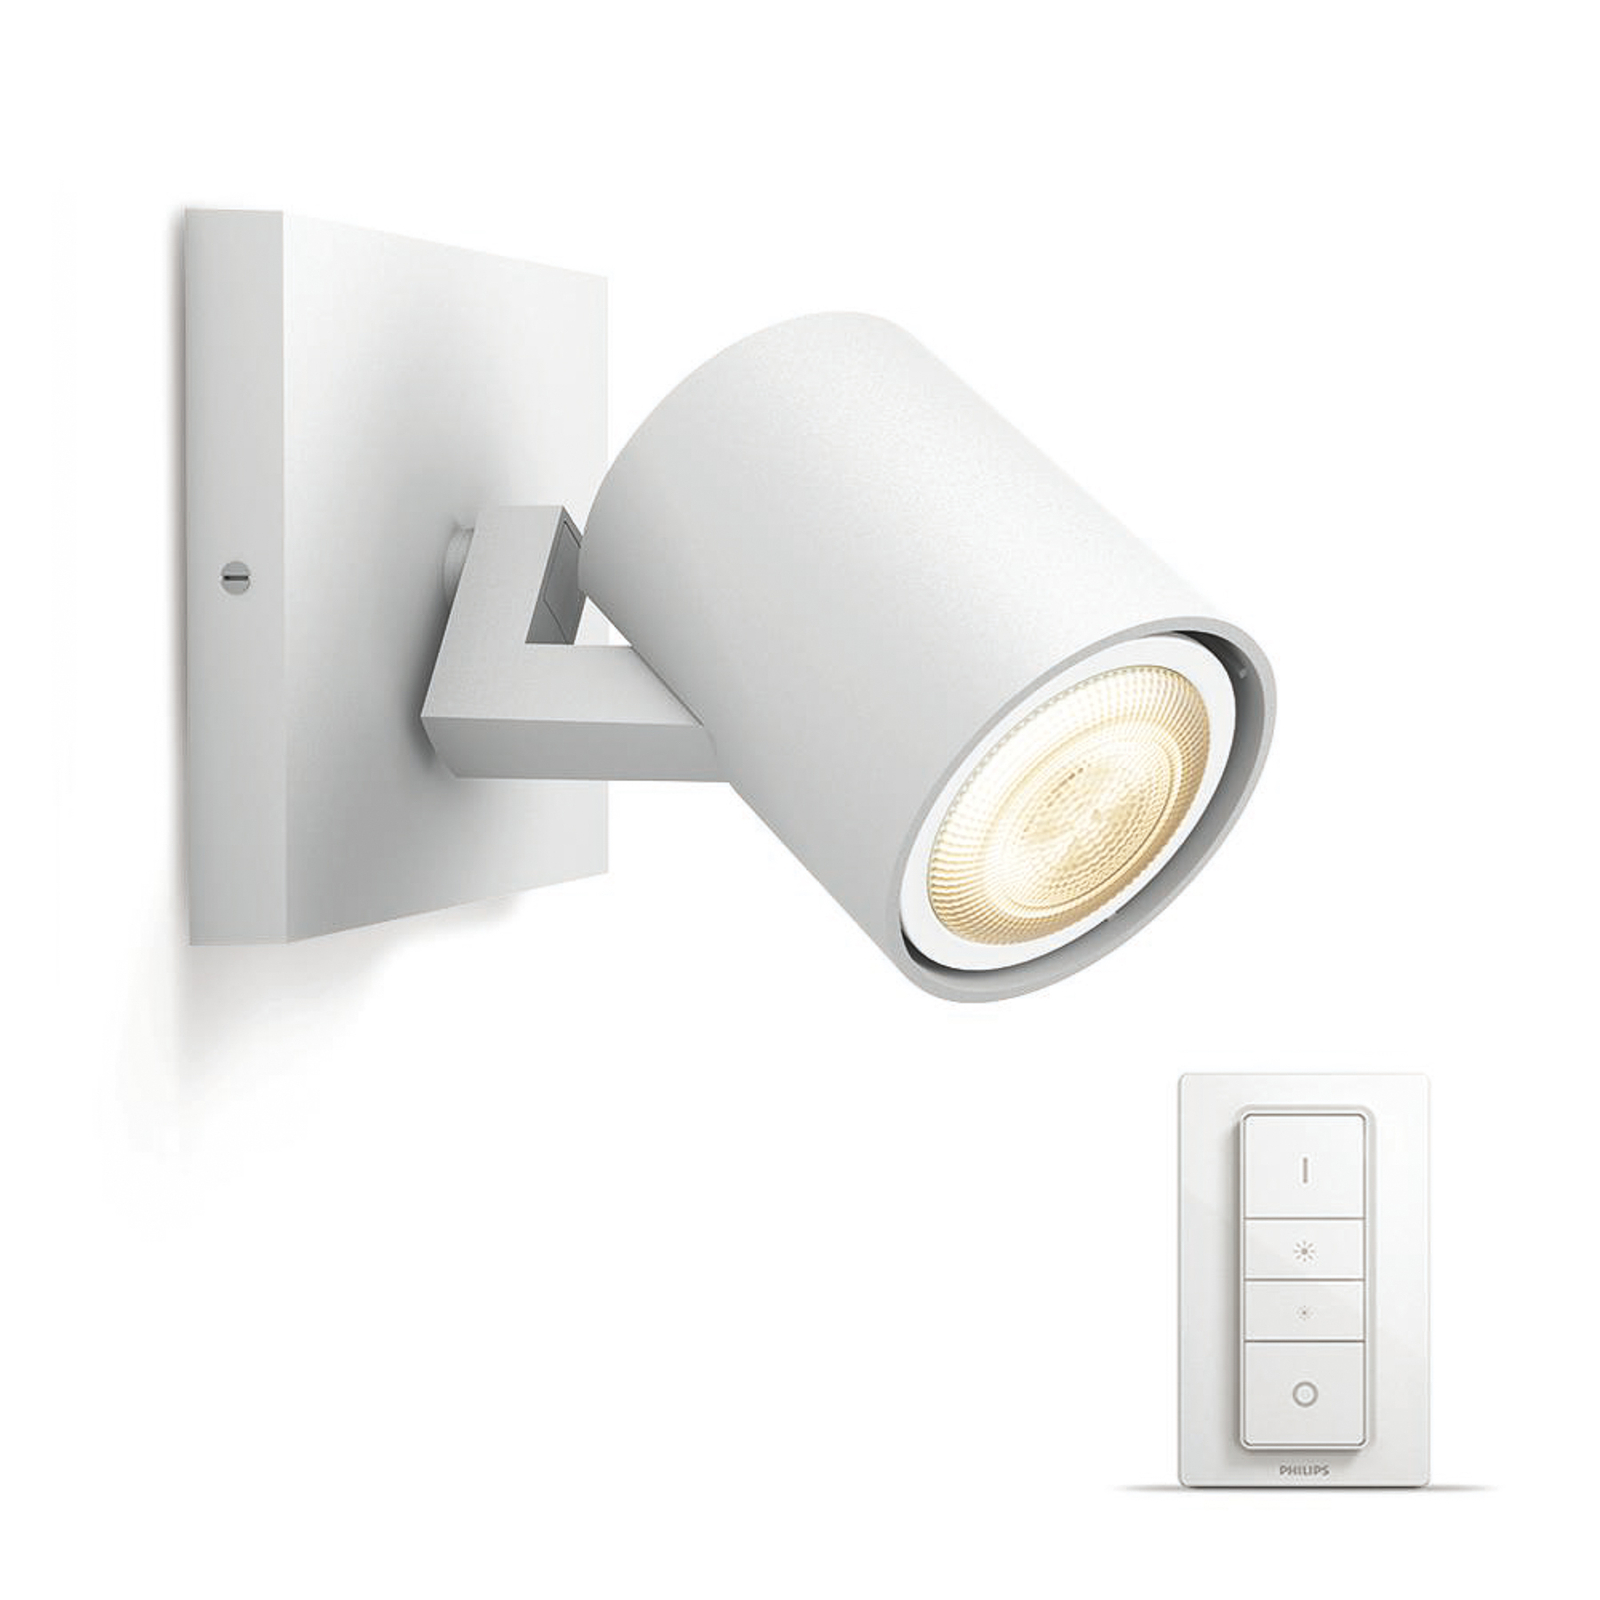 Bowling levenslang Sociologie Philips Hue White Ambiance Runner spot wit | Lampen24.be